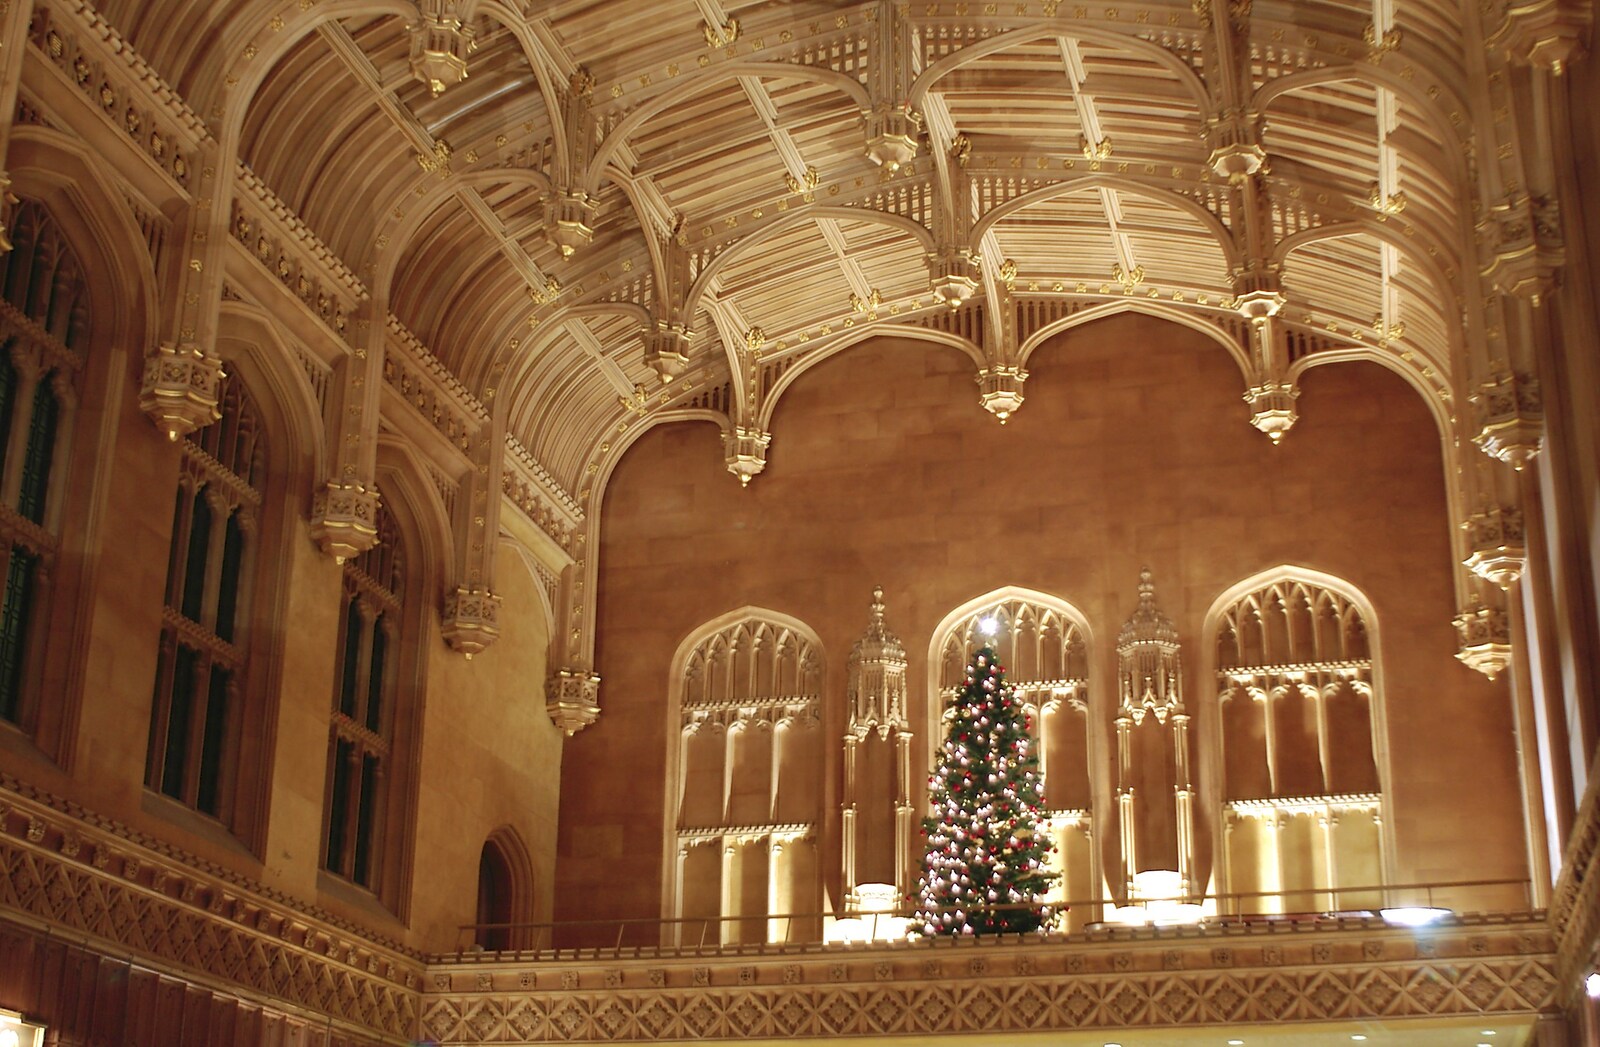 The roof of the dining hall from Qualcomm Cambridge's Christmas Do, King's College, Cambridge - 22nd December 2004